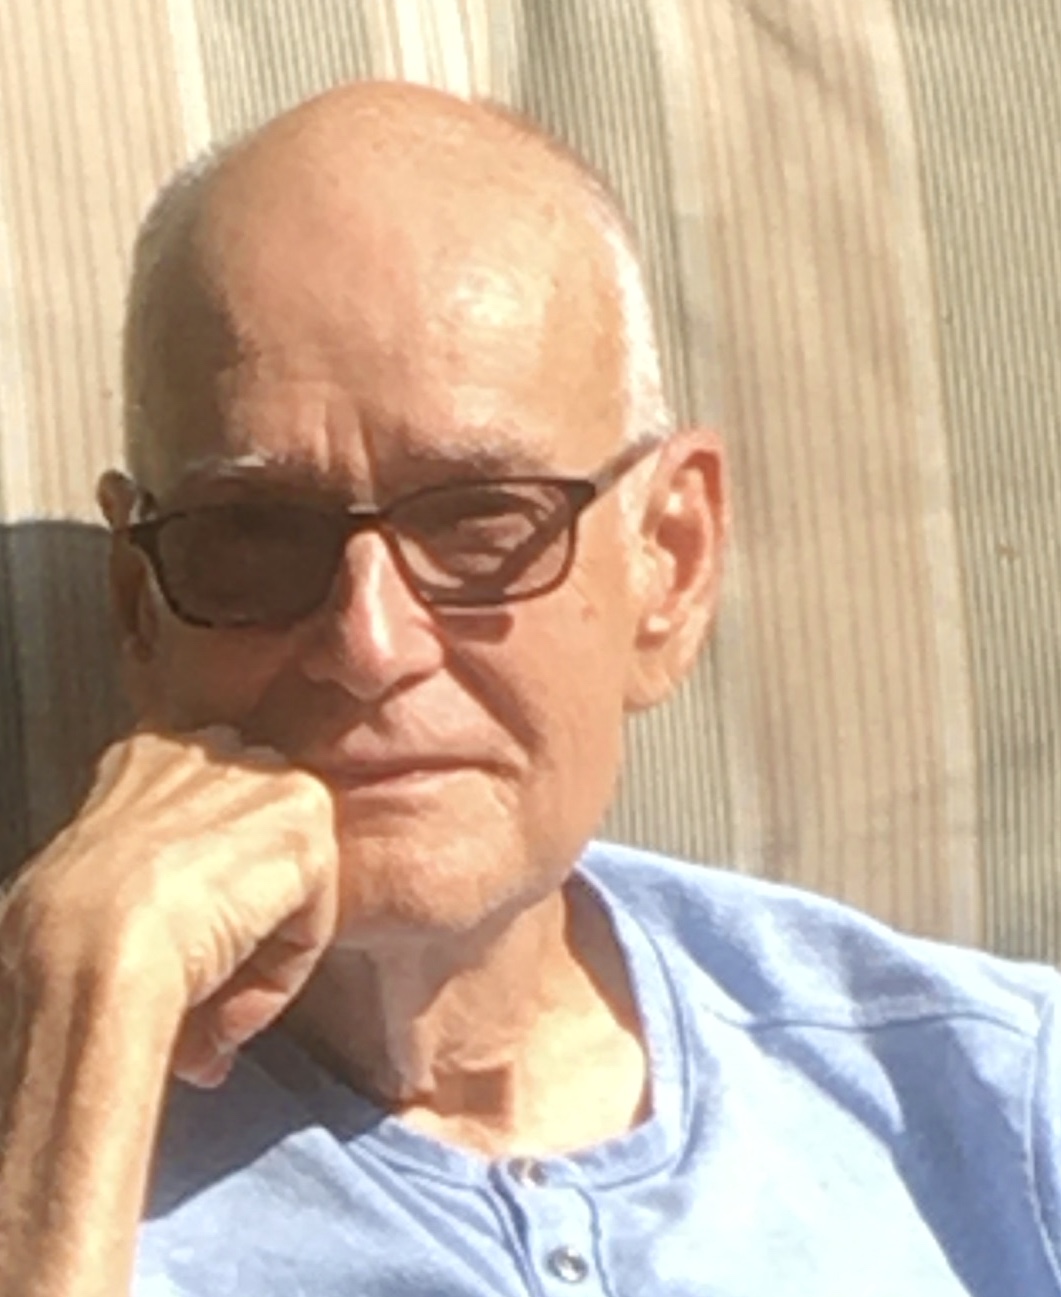 An older man with glasses sitting in a chair.